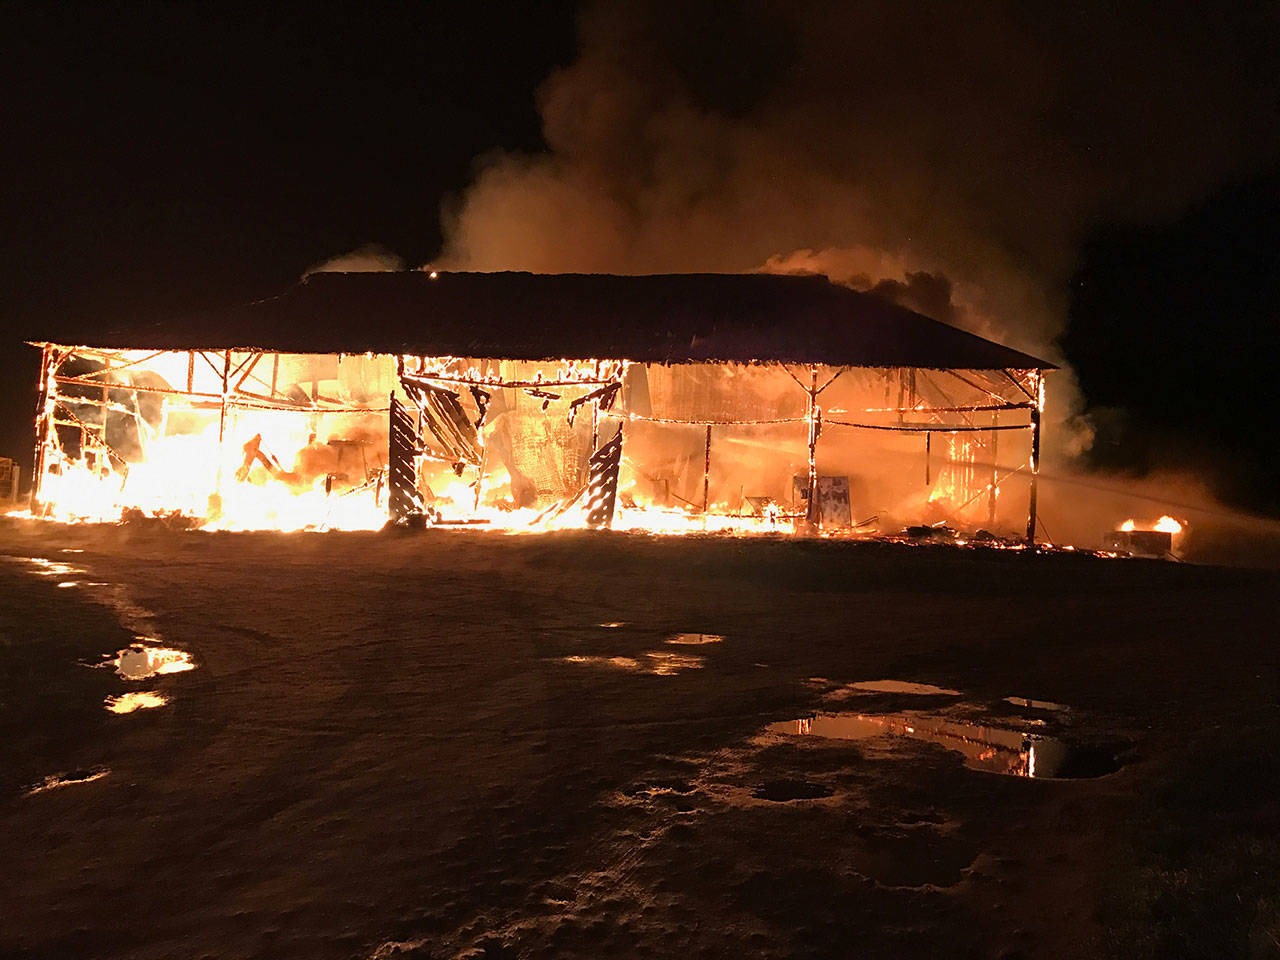 When Central Whidbey Fire & Rescue arrived on the scene, the barn was fully involved in flames Monday, March 6, 2017. Photo provided by Central Whidbey Fire & Rescue